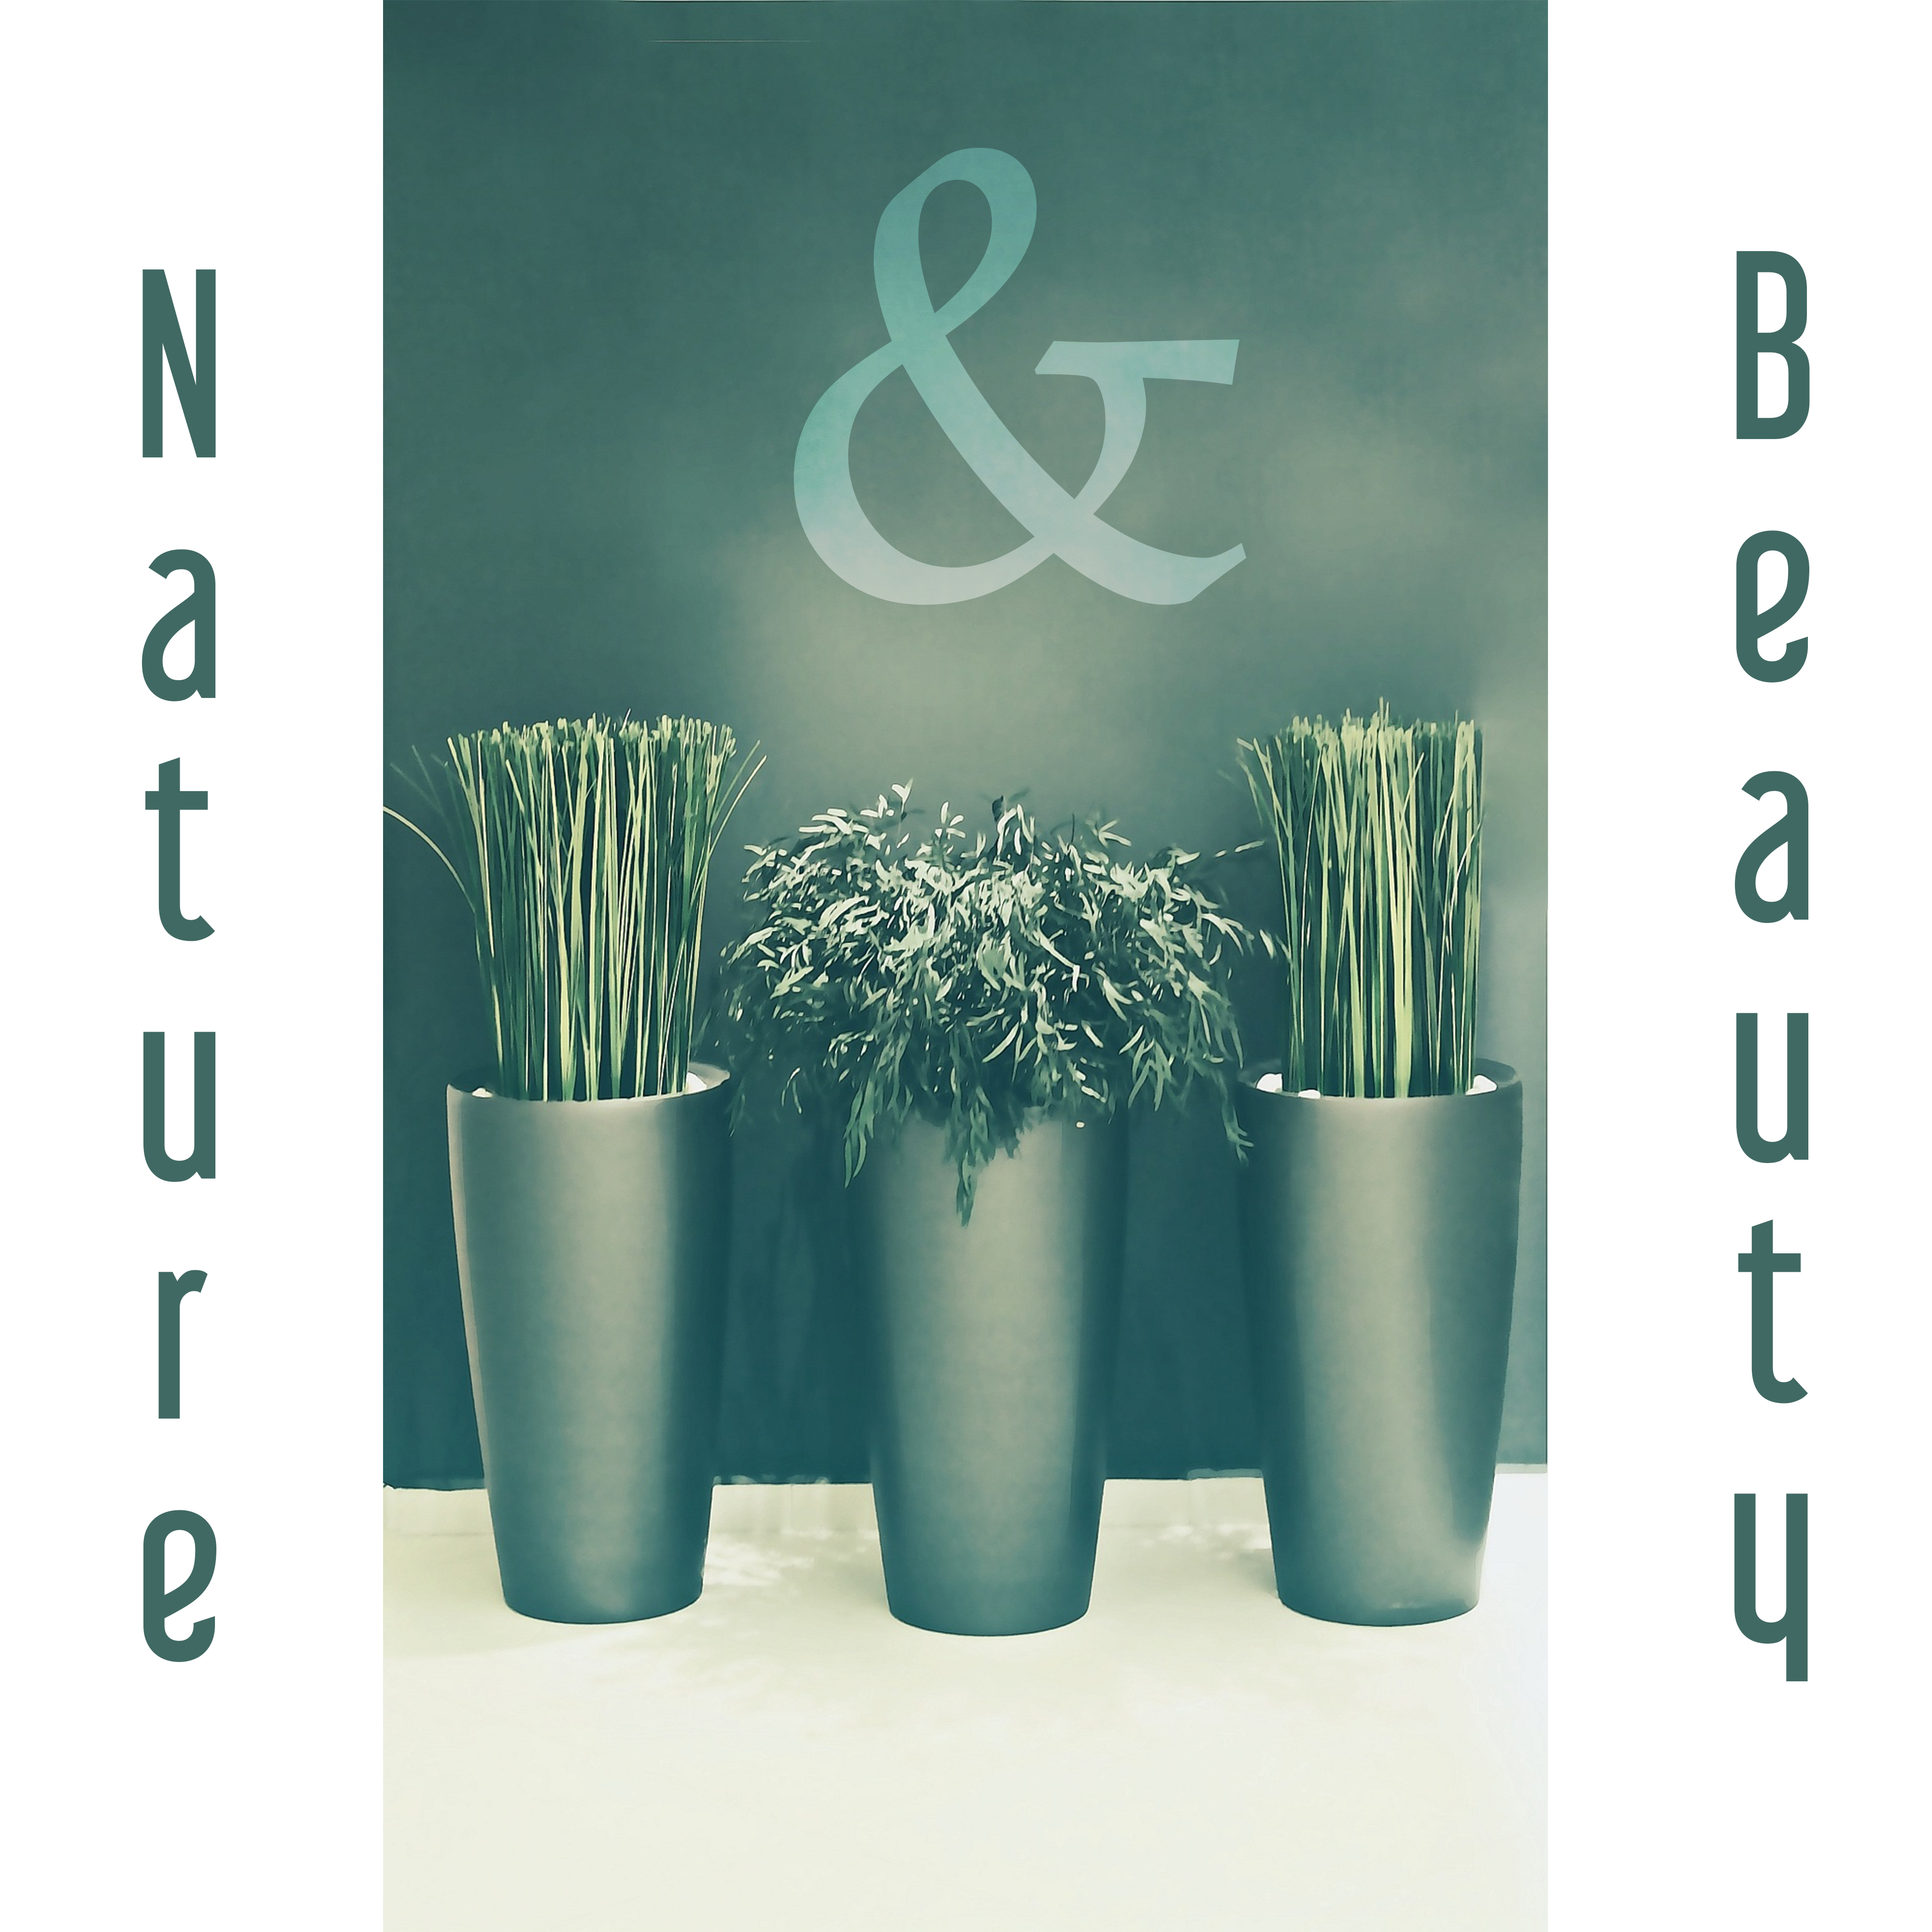 Nature & Beauty – Peaceful Music for Spa, Wellness, Deep Massage, Nature Sounds, Singing Birds, Melodies of Sea